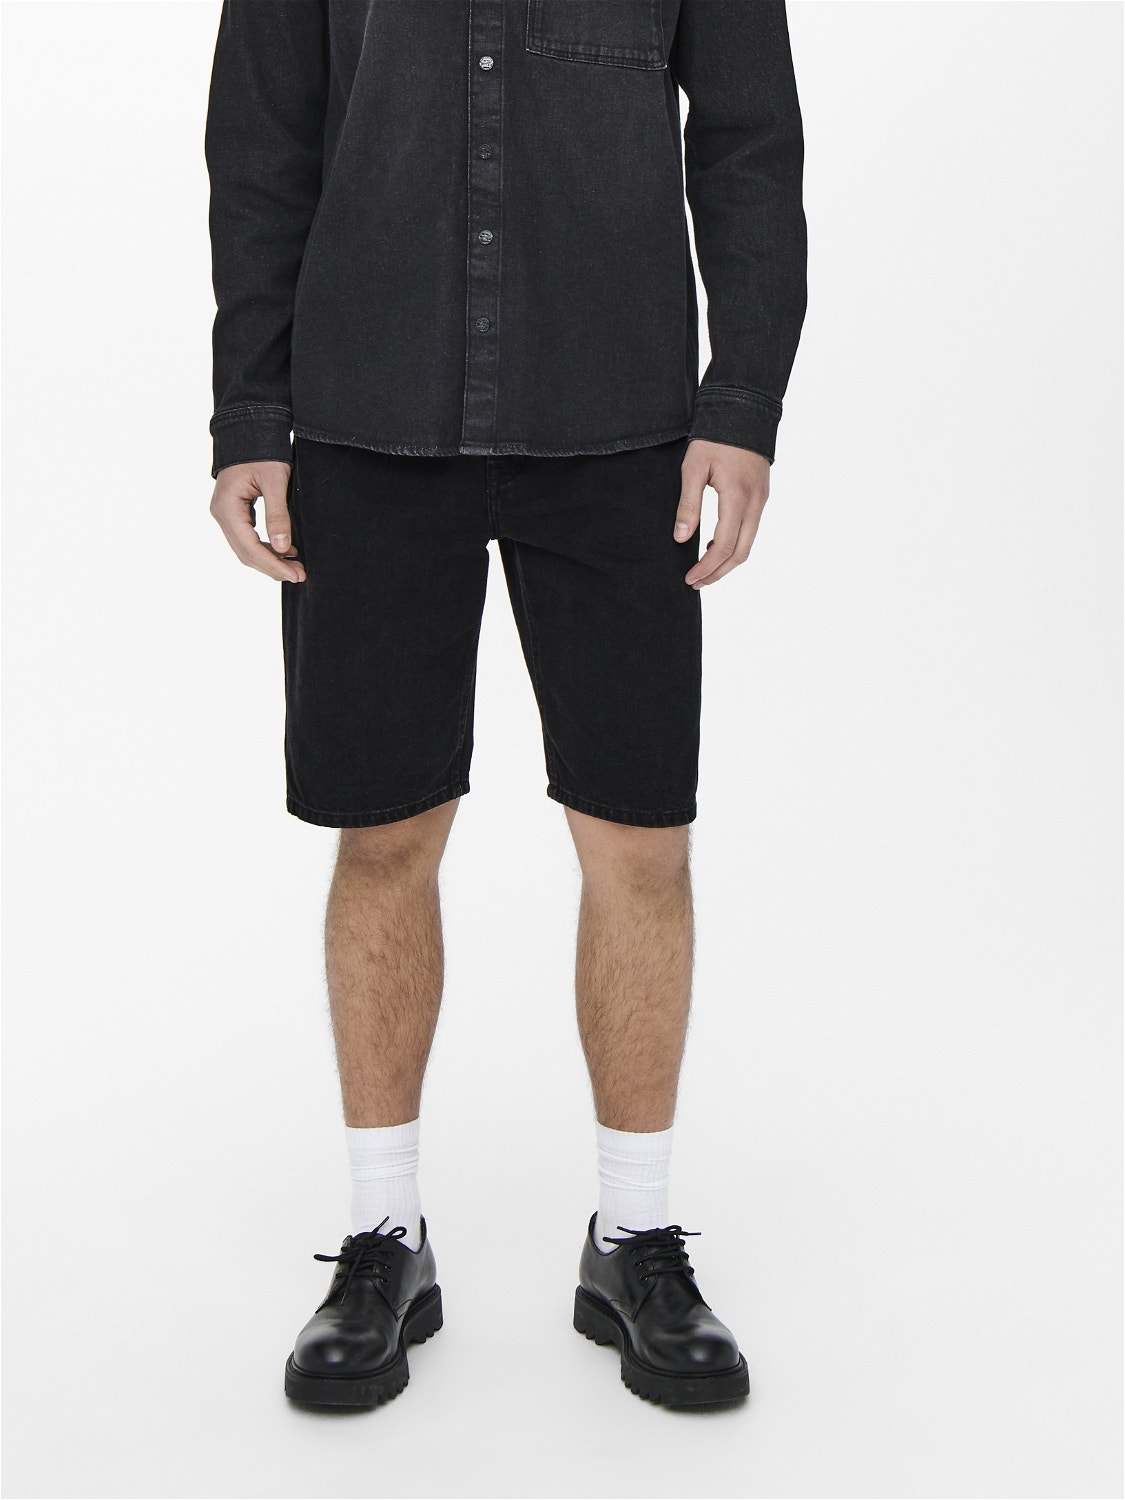 ONLY & SONS Tapered Fit Shorts -Black Denim - 22021899